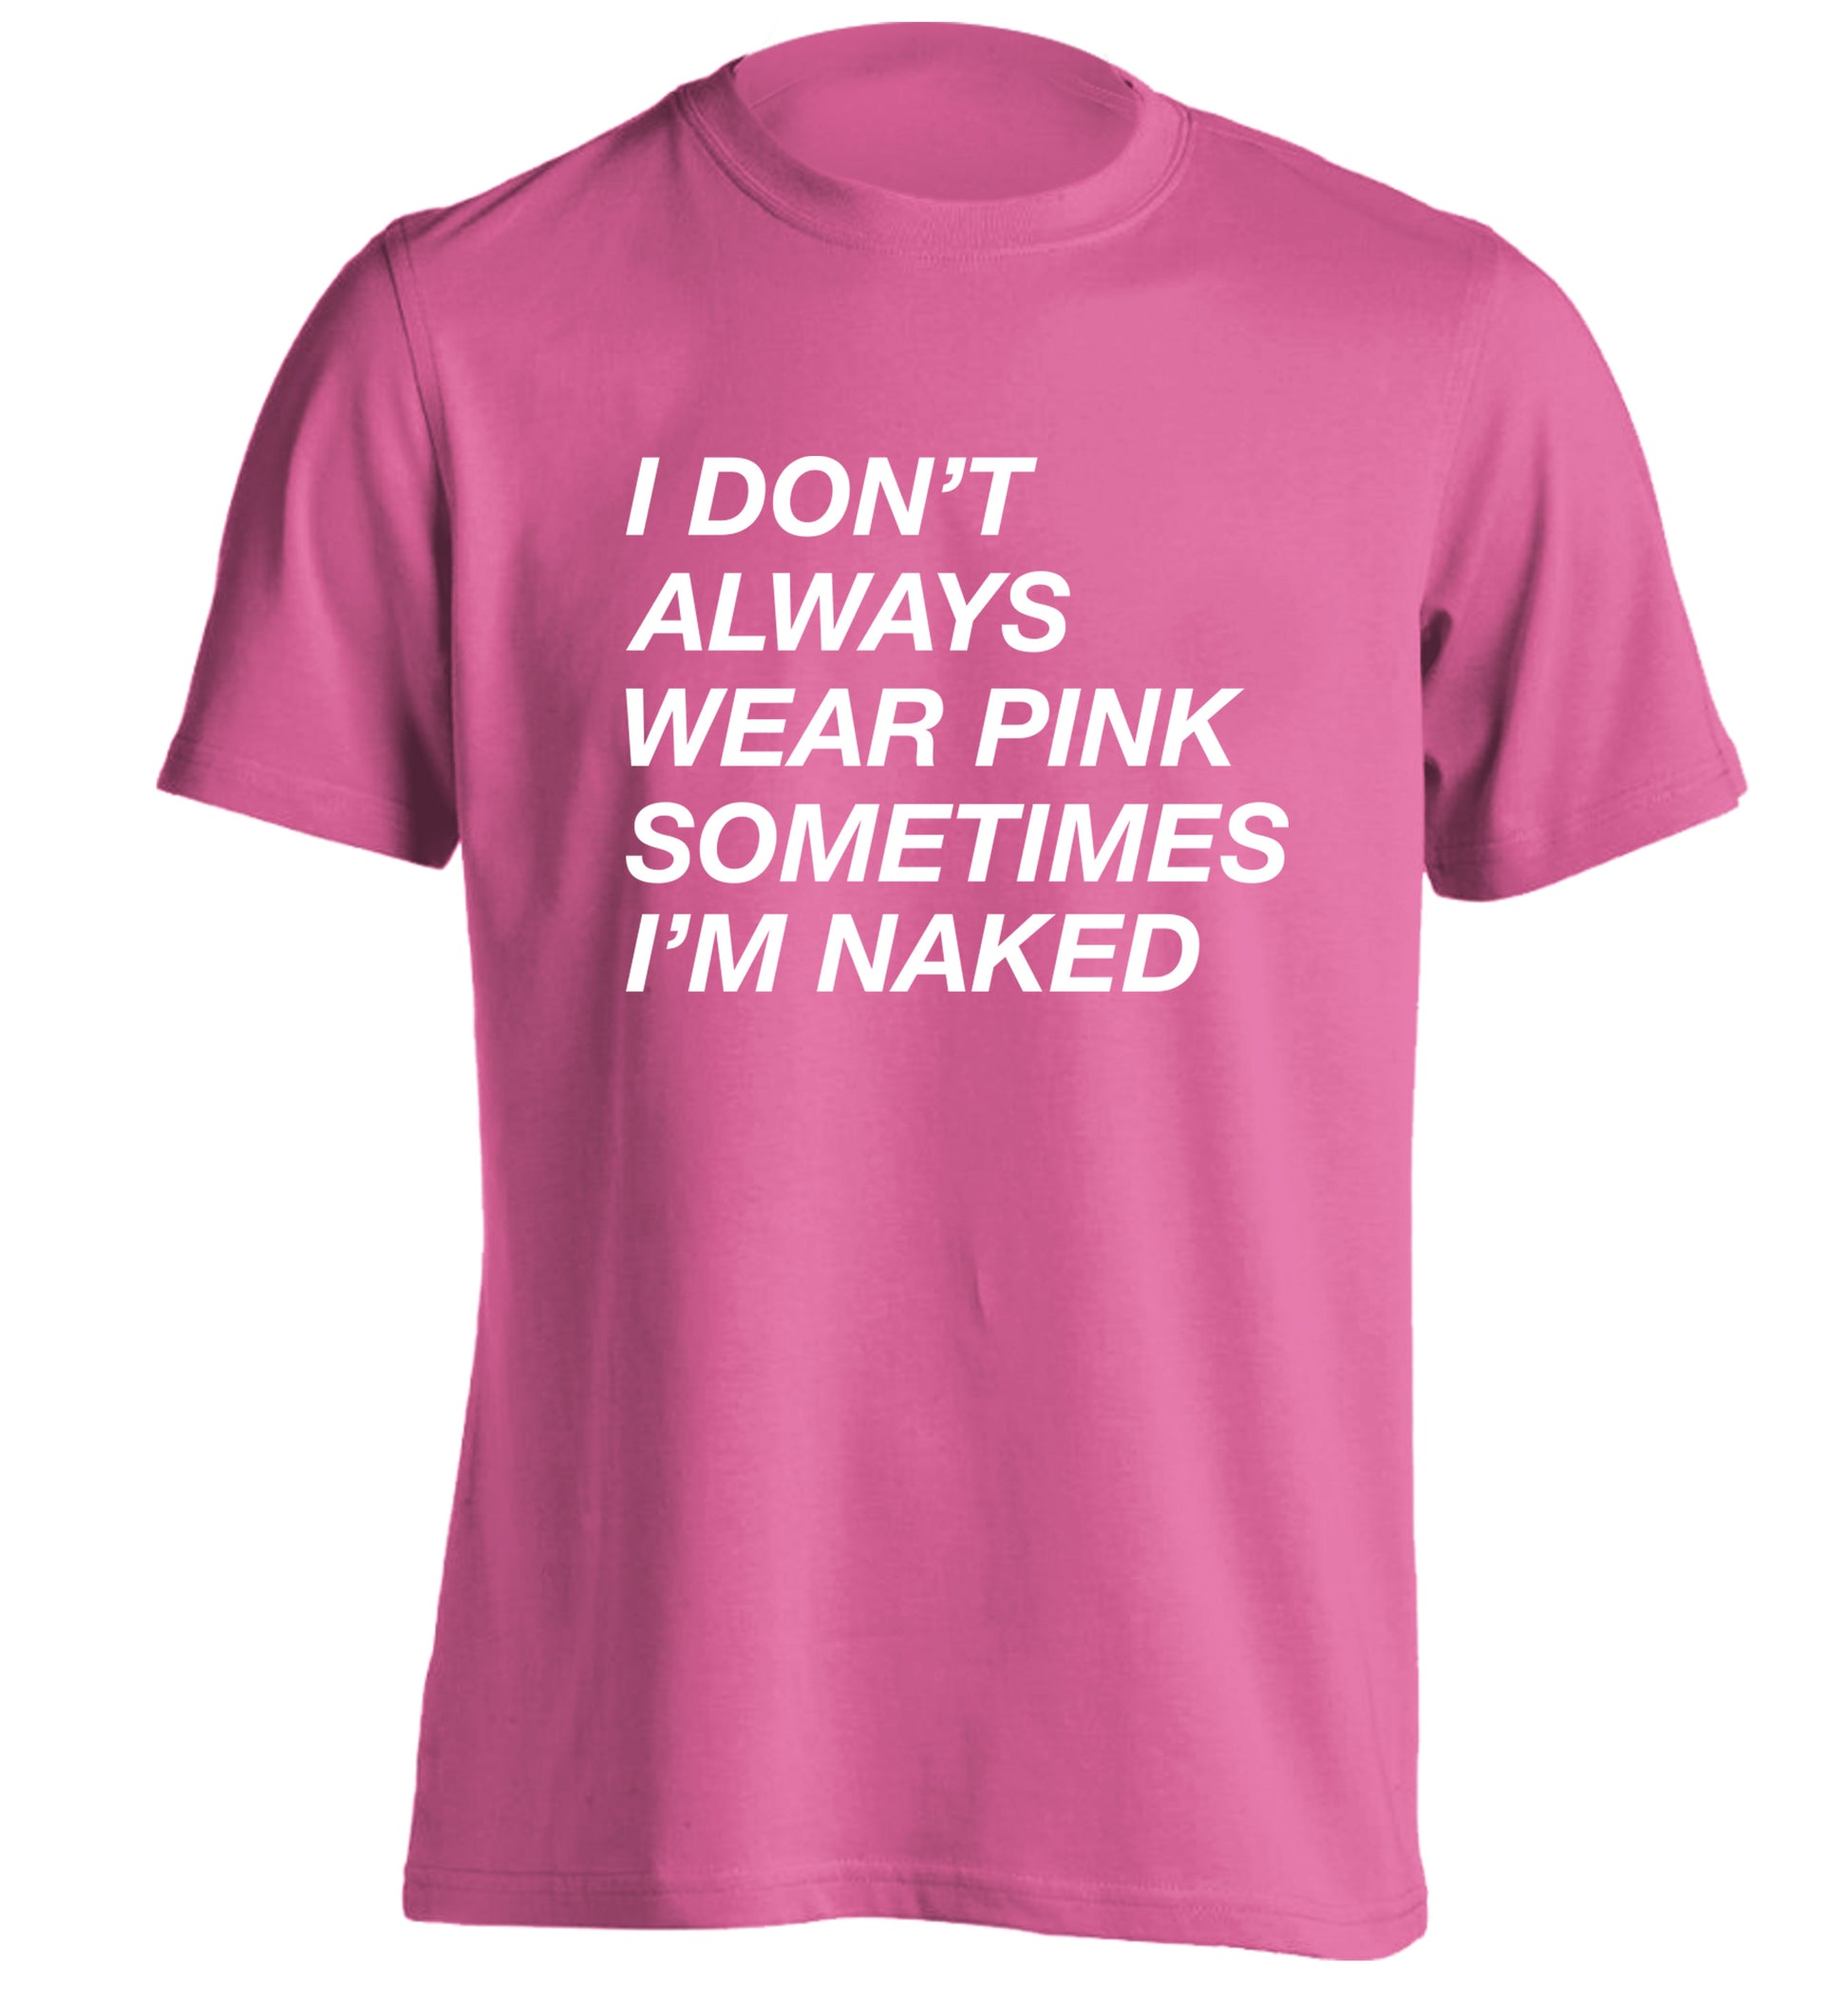 I don't always wear pink sometimes I'm naked adults unisex pink Tshirt 2XL